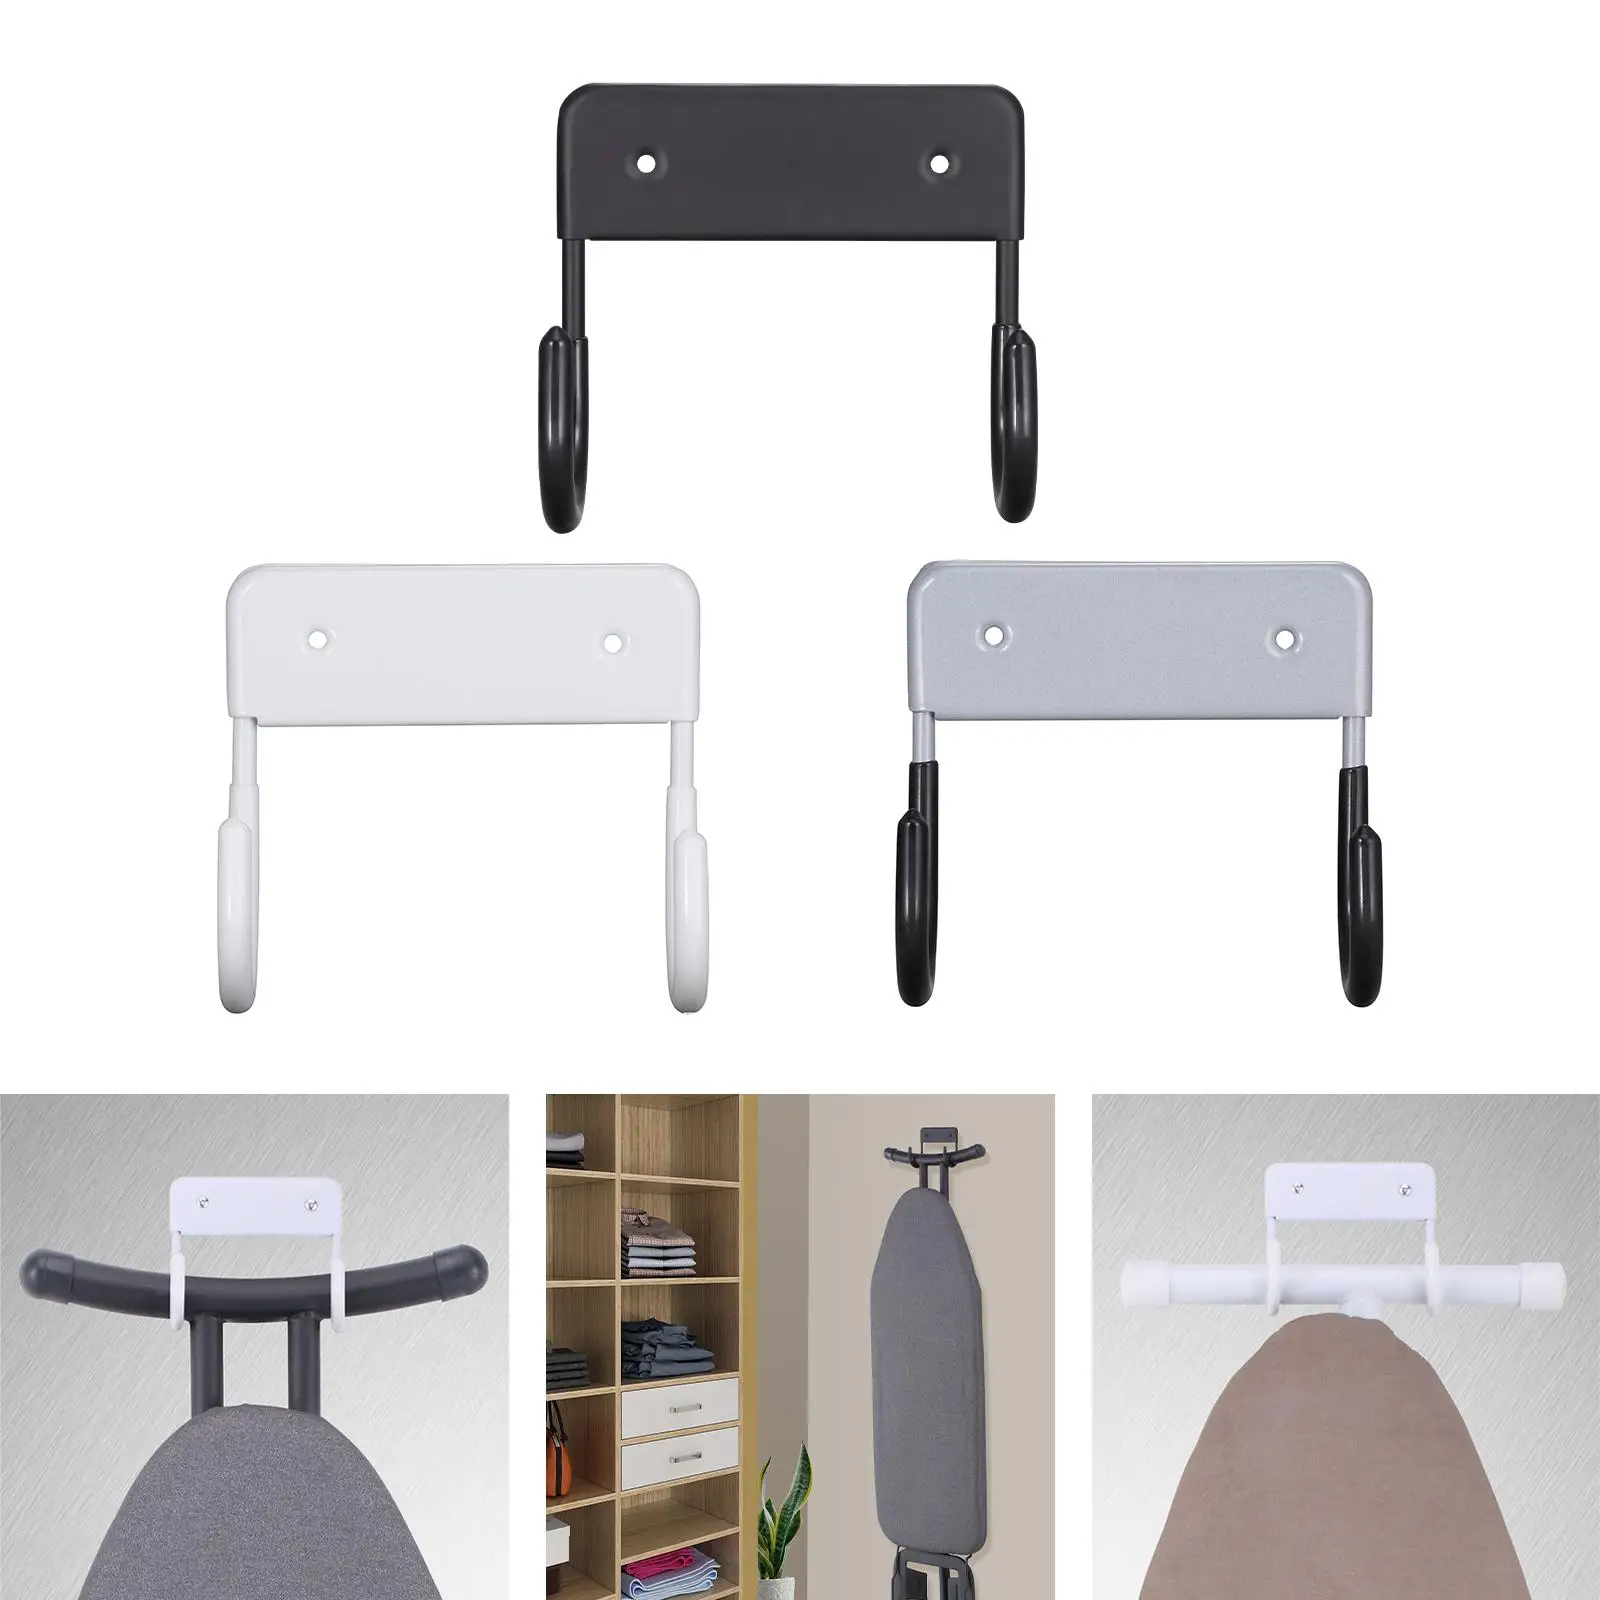 Small Ironing Board Hook Hook Removable Coat Hanger Laundry Wall Mount Ironing